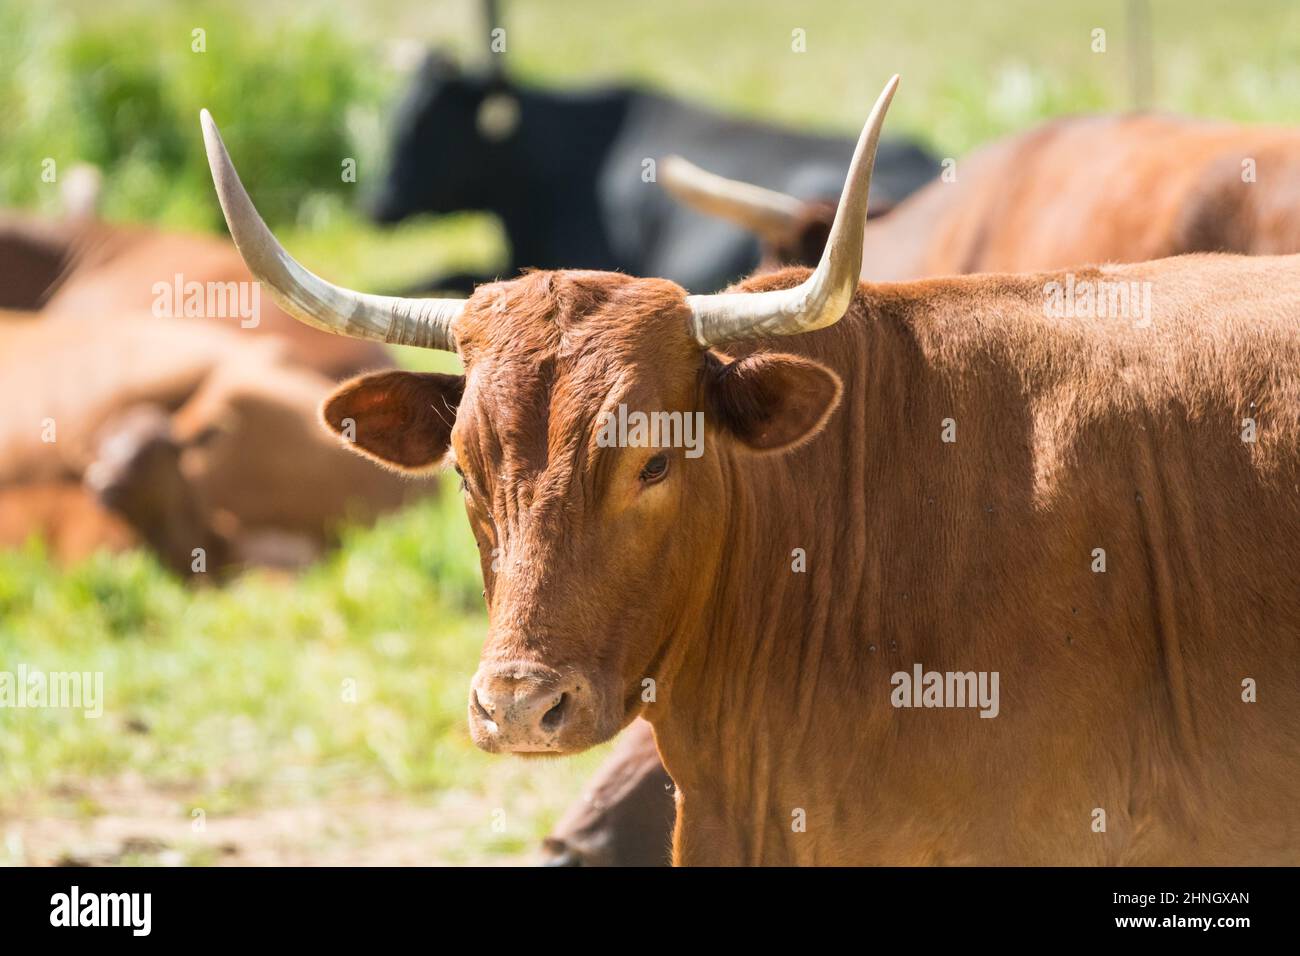 beef cattle closeup face and head with sharp horns on a farm in the Overberg region, Western Cape, South Africa concept livestock farming Stock Photo